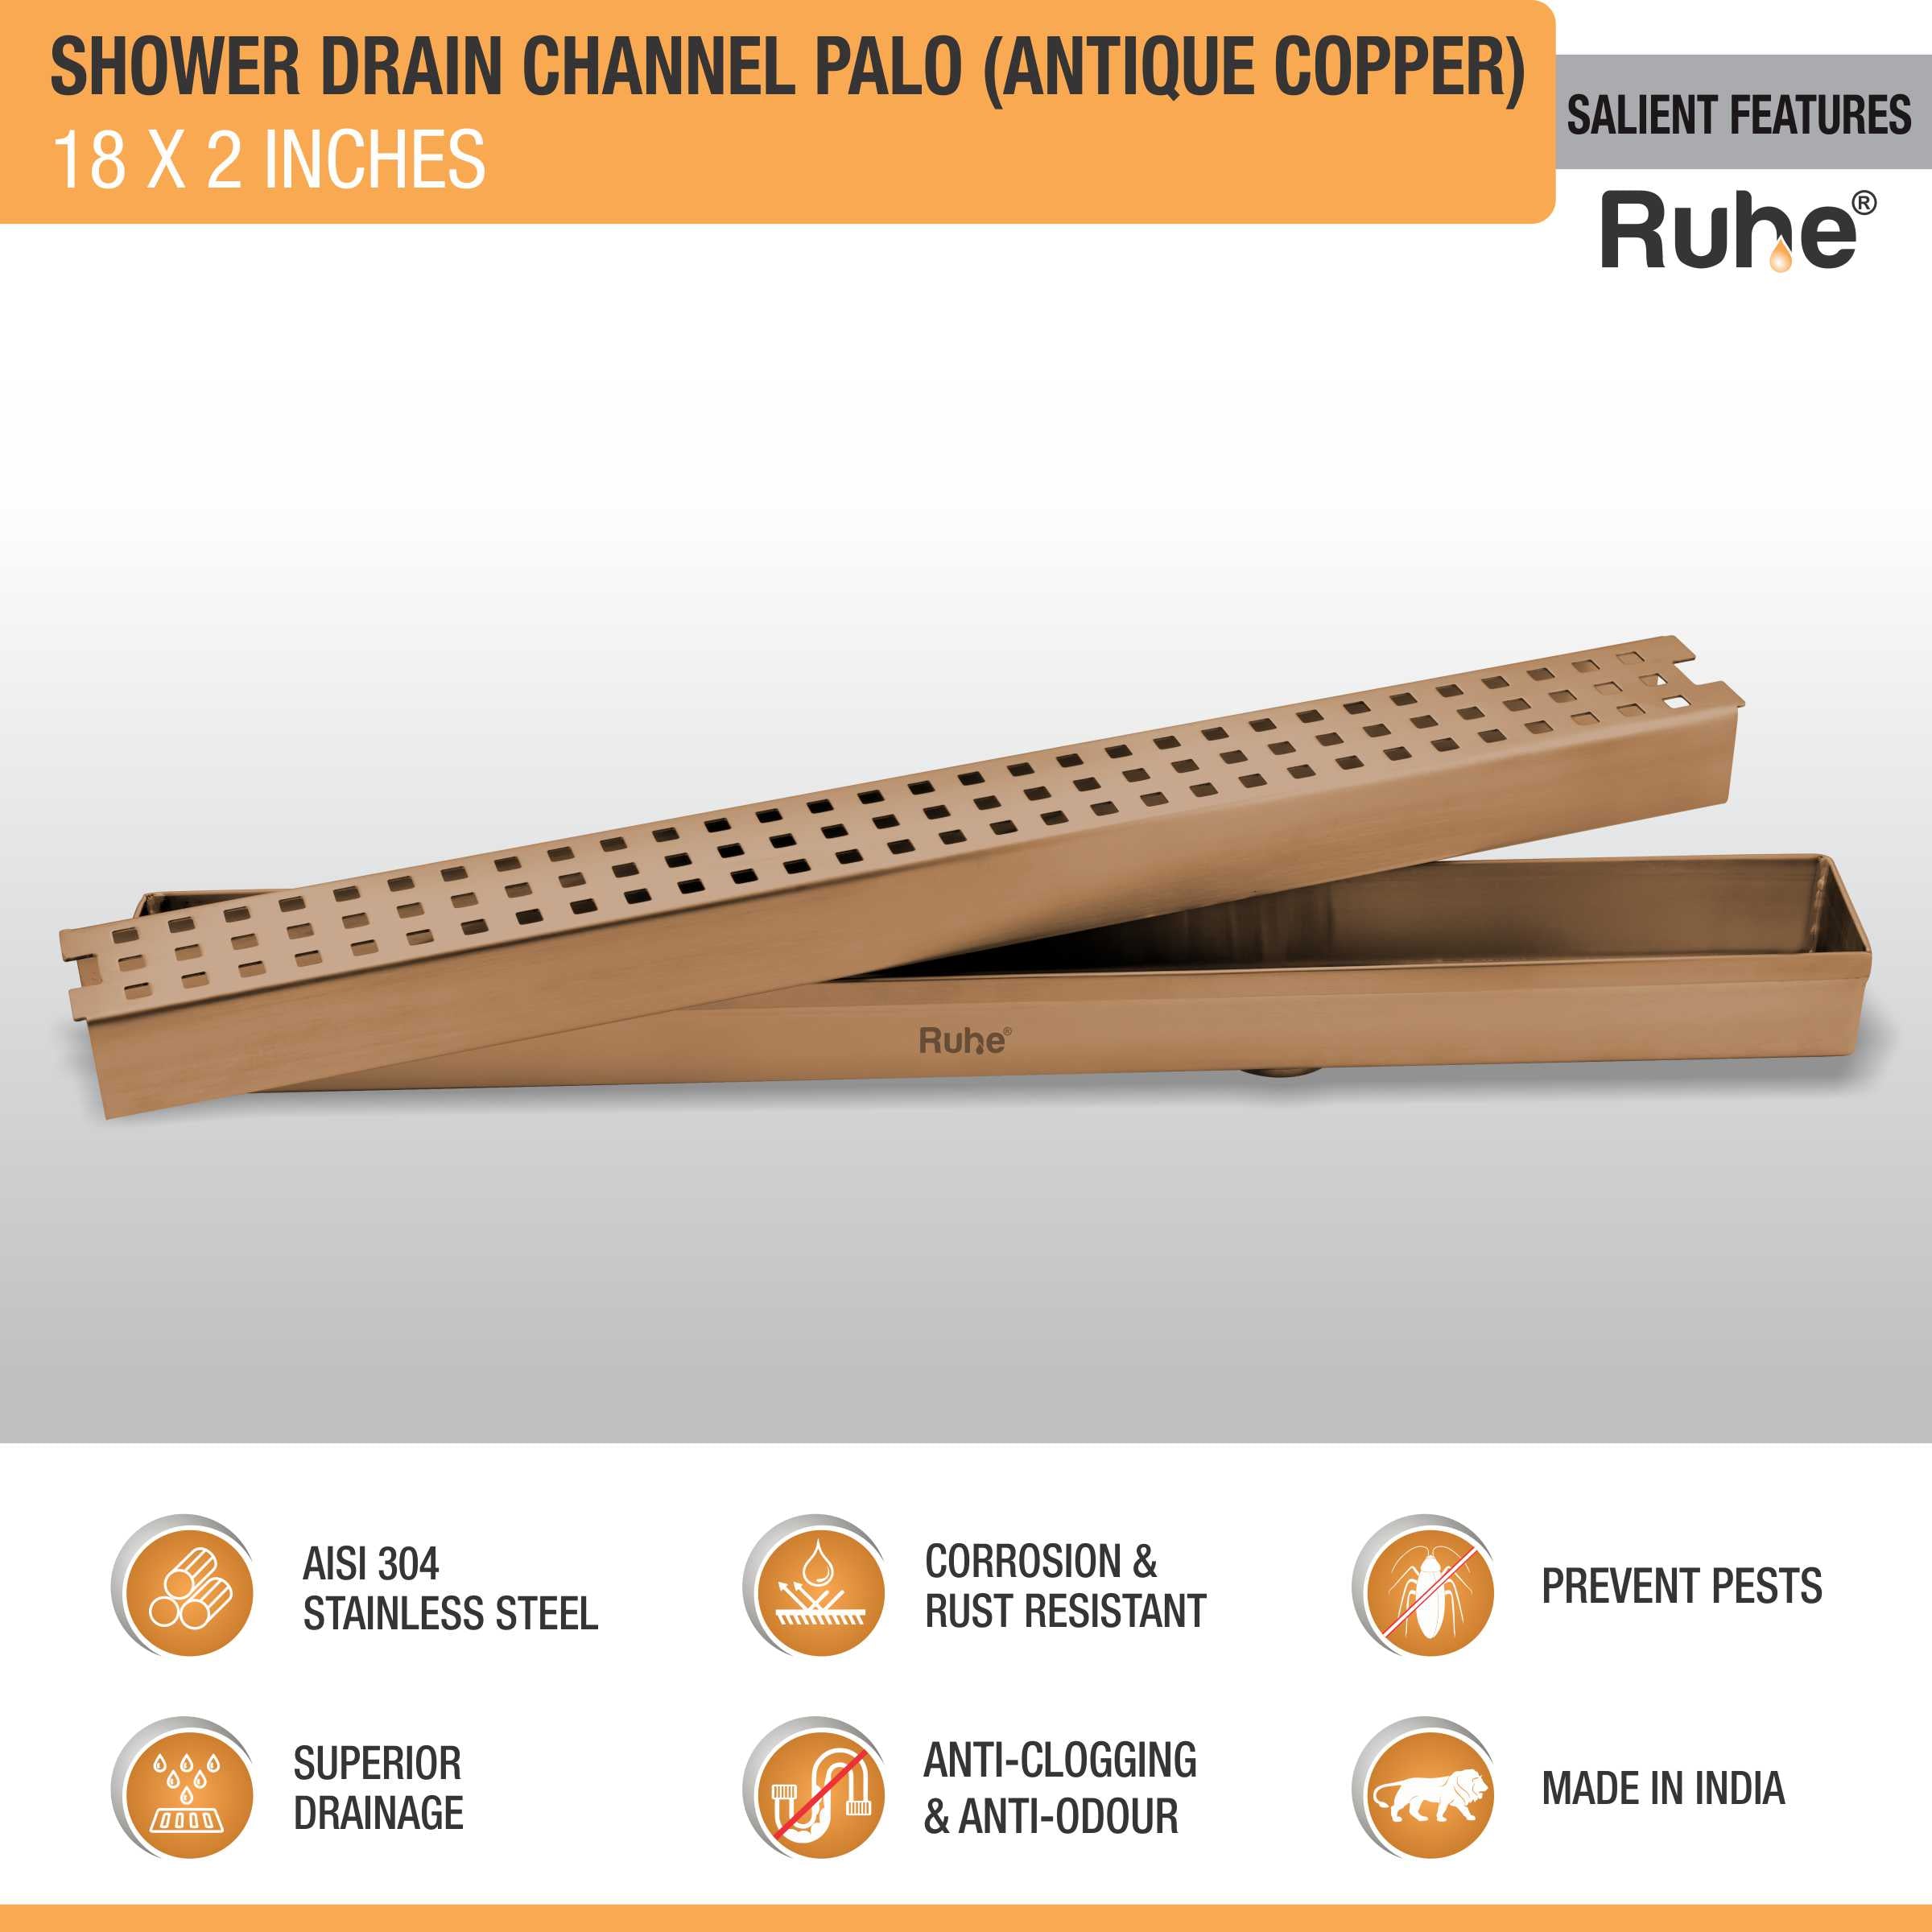 Palo Shower Drain Channel (18 x 2 Inches) ROSE GOLD/ANTIQUE COPPER features